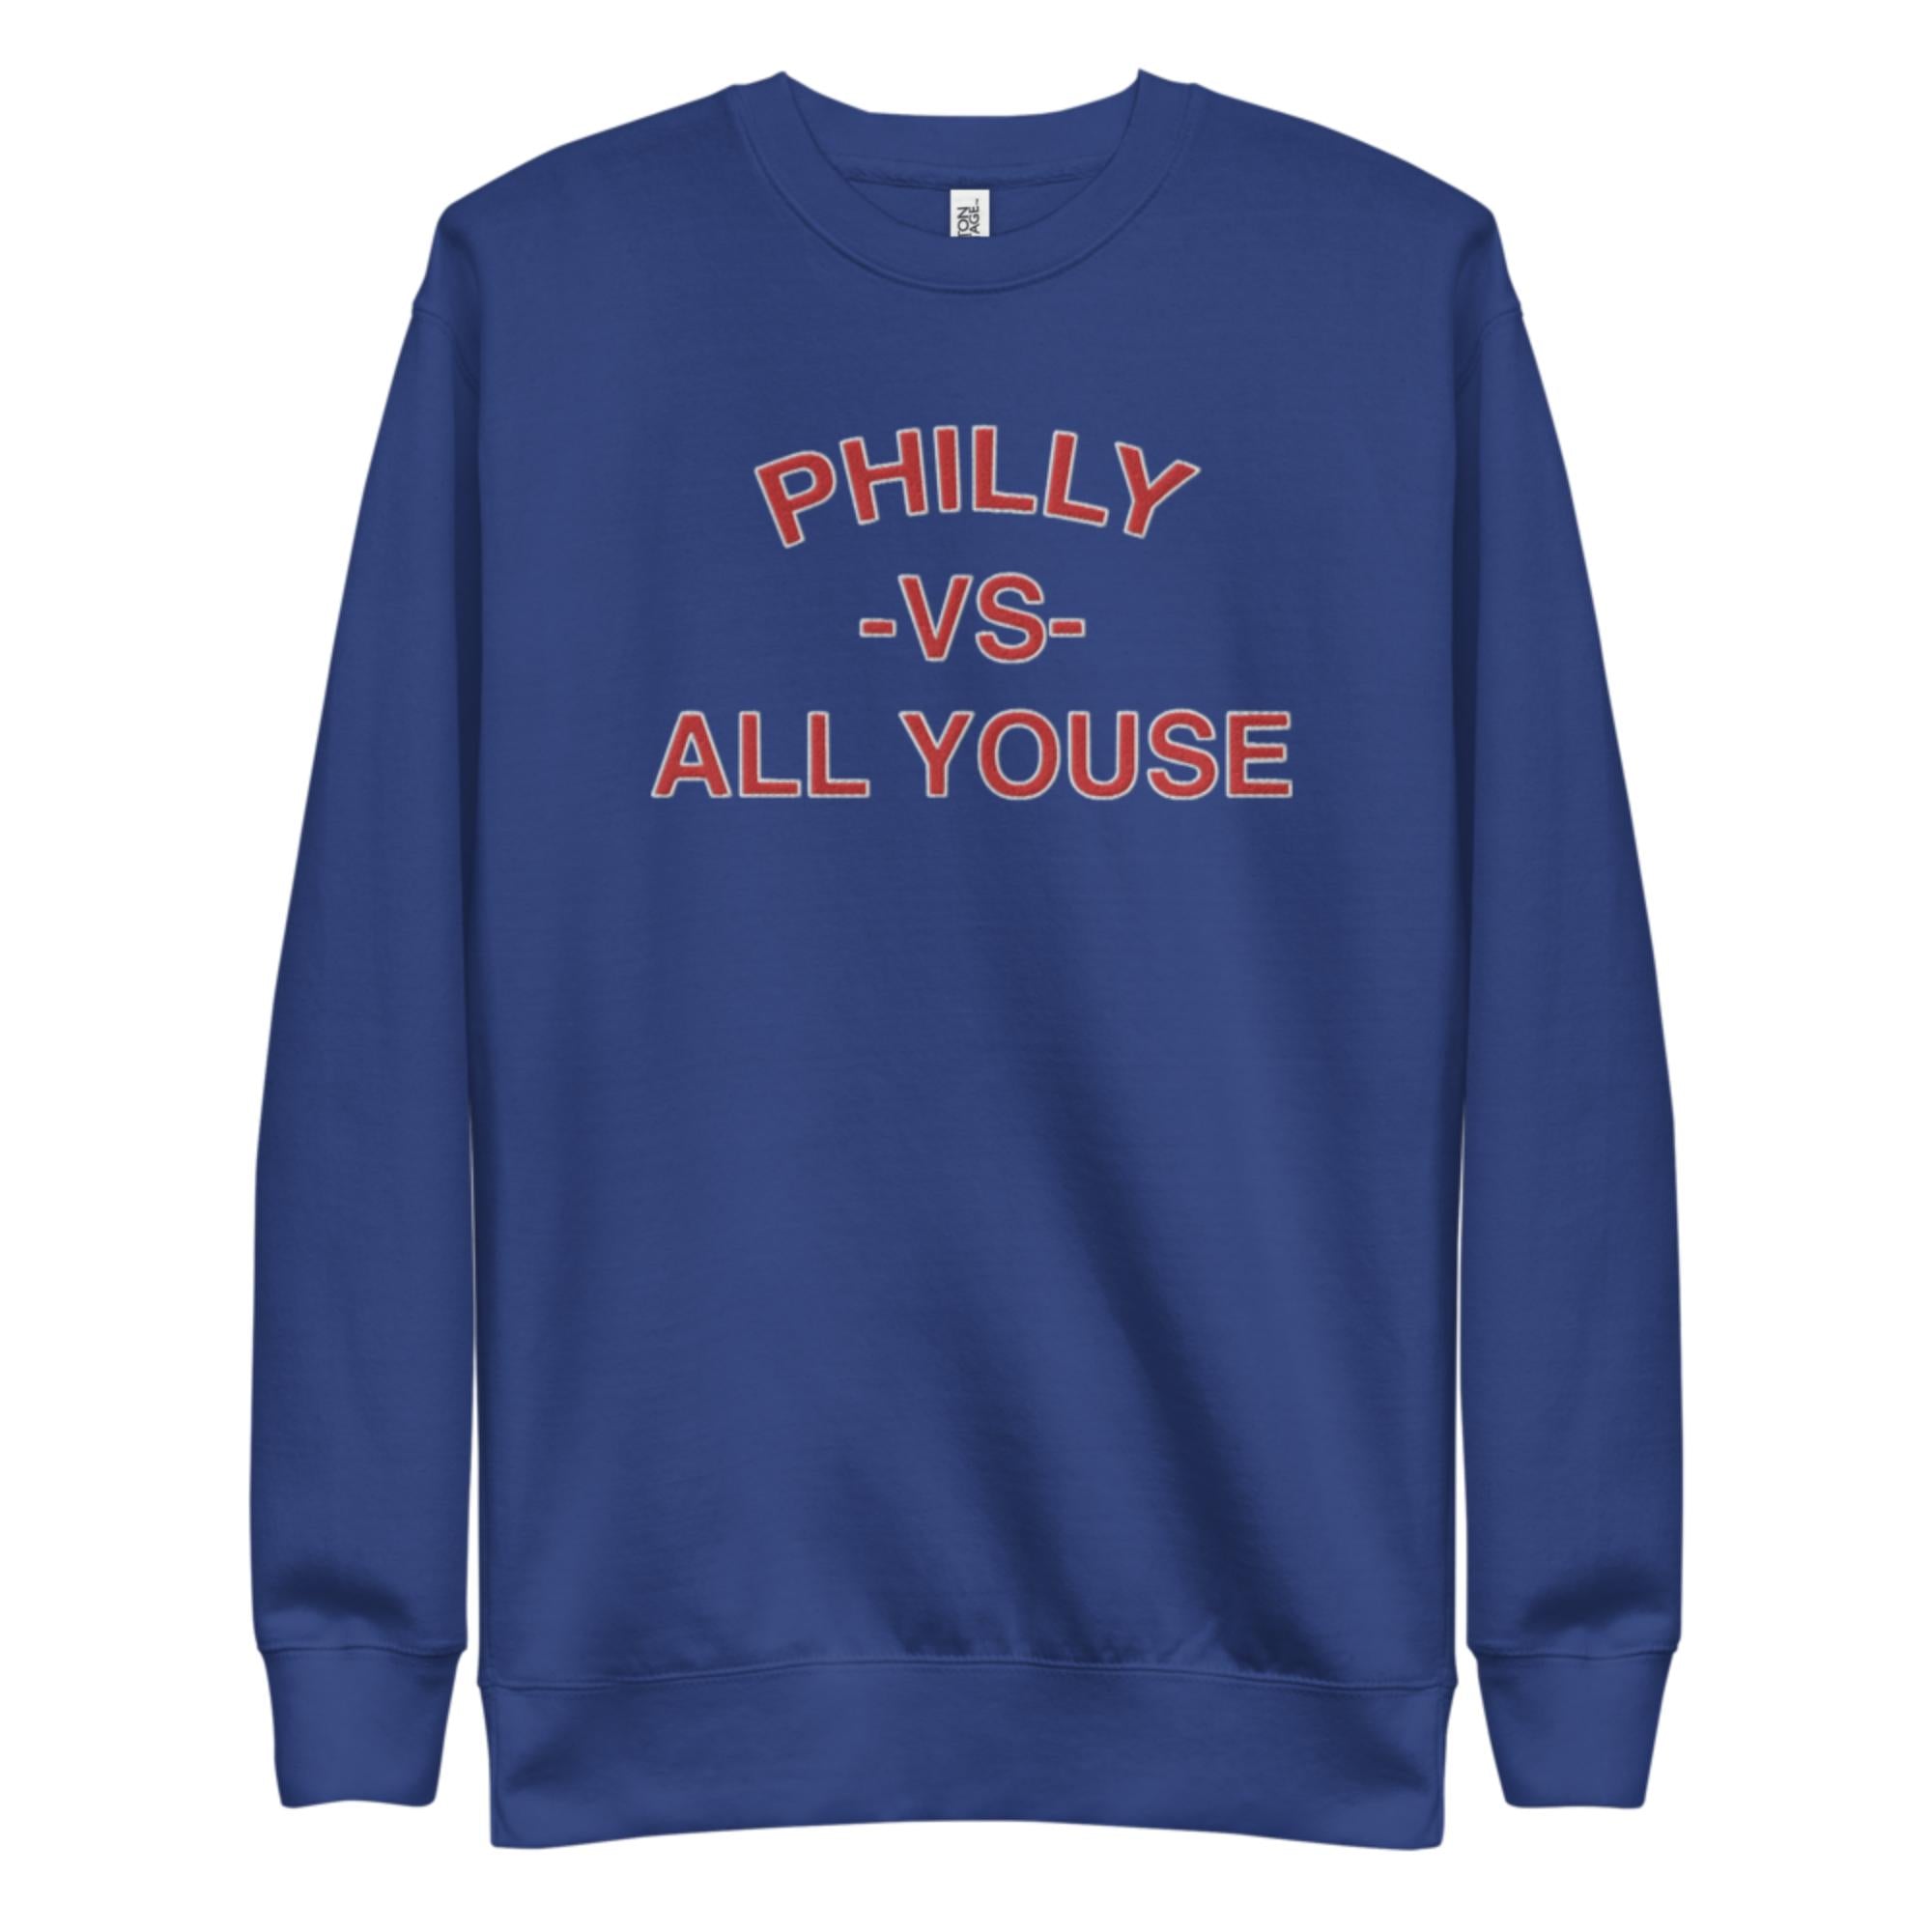 "Philly vs. All Youse" Embroidered Sweatshirt